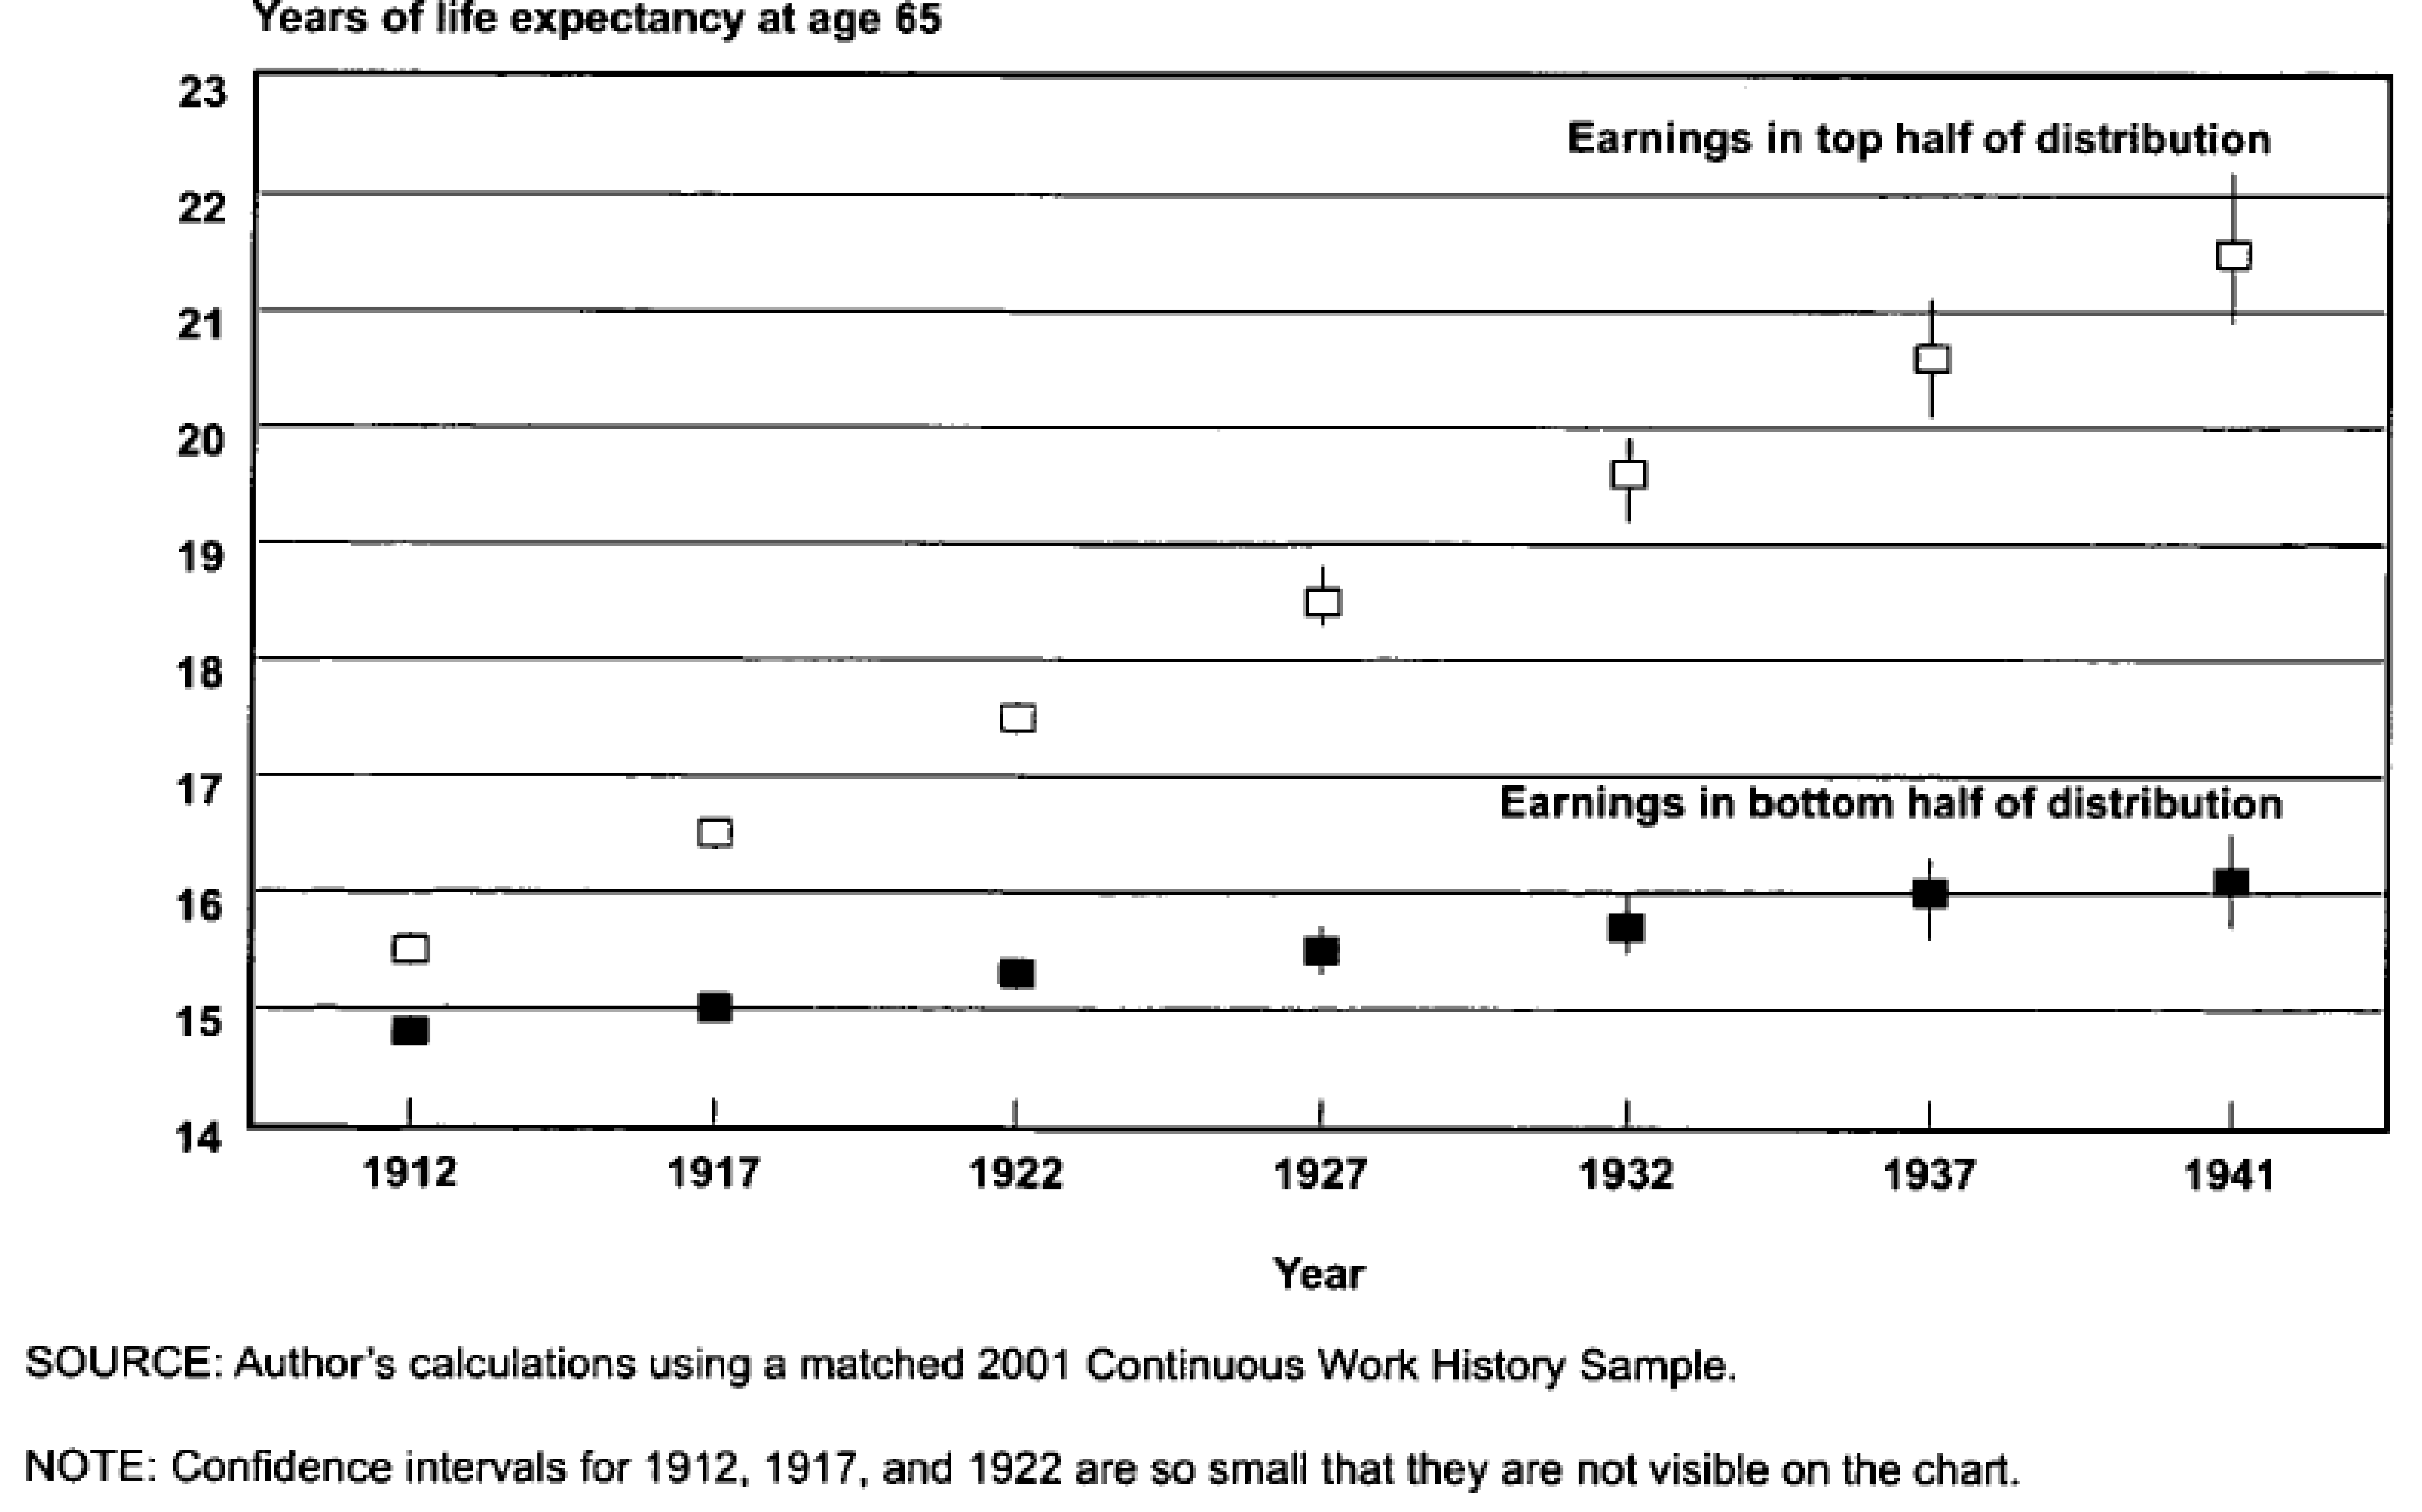 Odds ratio (confidence intervals) for the bottom half of the earnings distribution relative to the top half of the distribution, by year of birth and age. Source: Table 1 @waldron2007trends